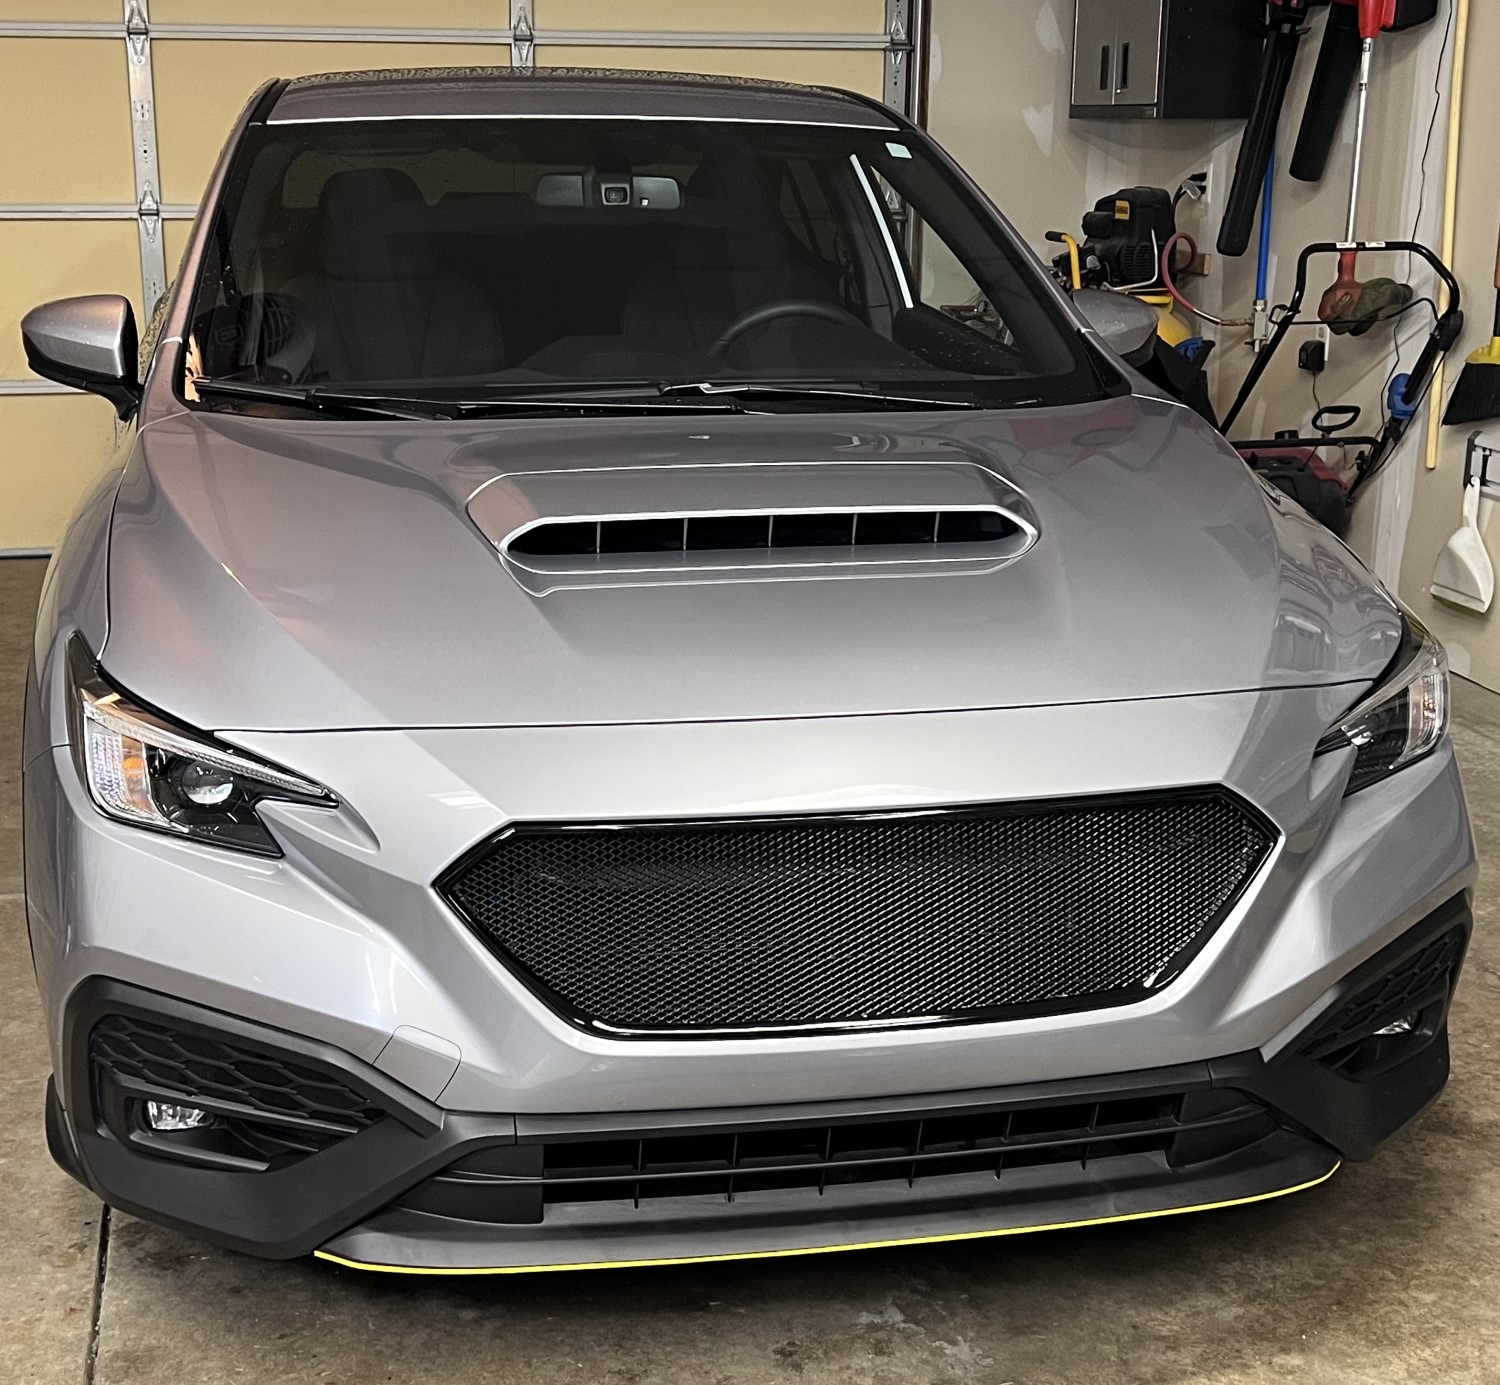 New and Bold: Upgraded Grille for Subaru WRX